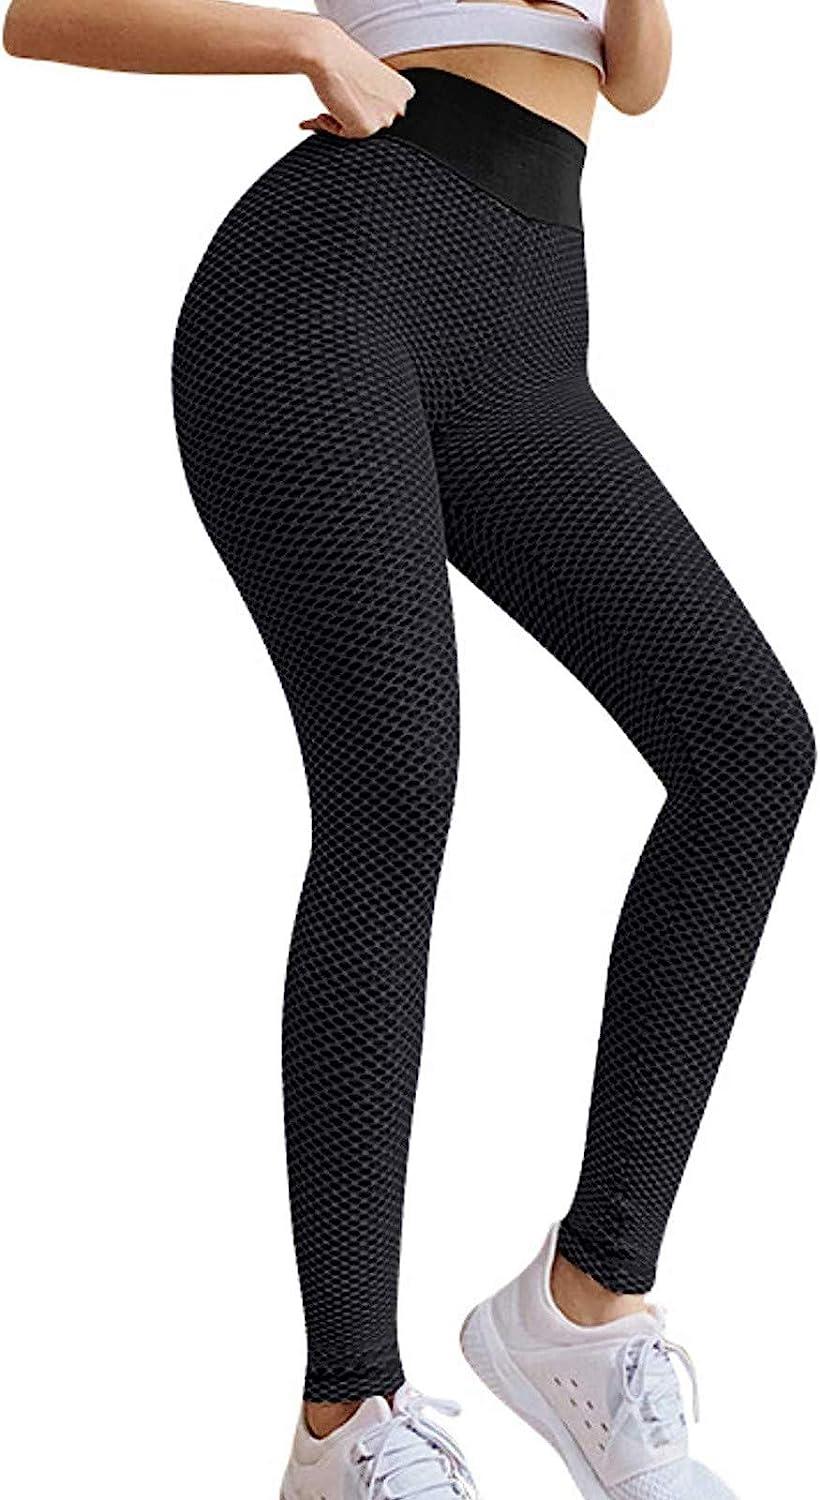 Being Runner Women Non-See Through Sportswear Sweatpants | Wine Yoga Tights  | Black Gym Legging | Plus Size Comfort Jeggings With Pocket (Black With